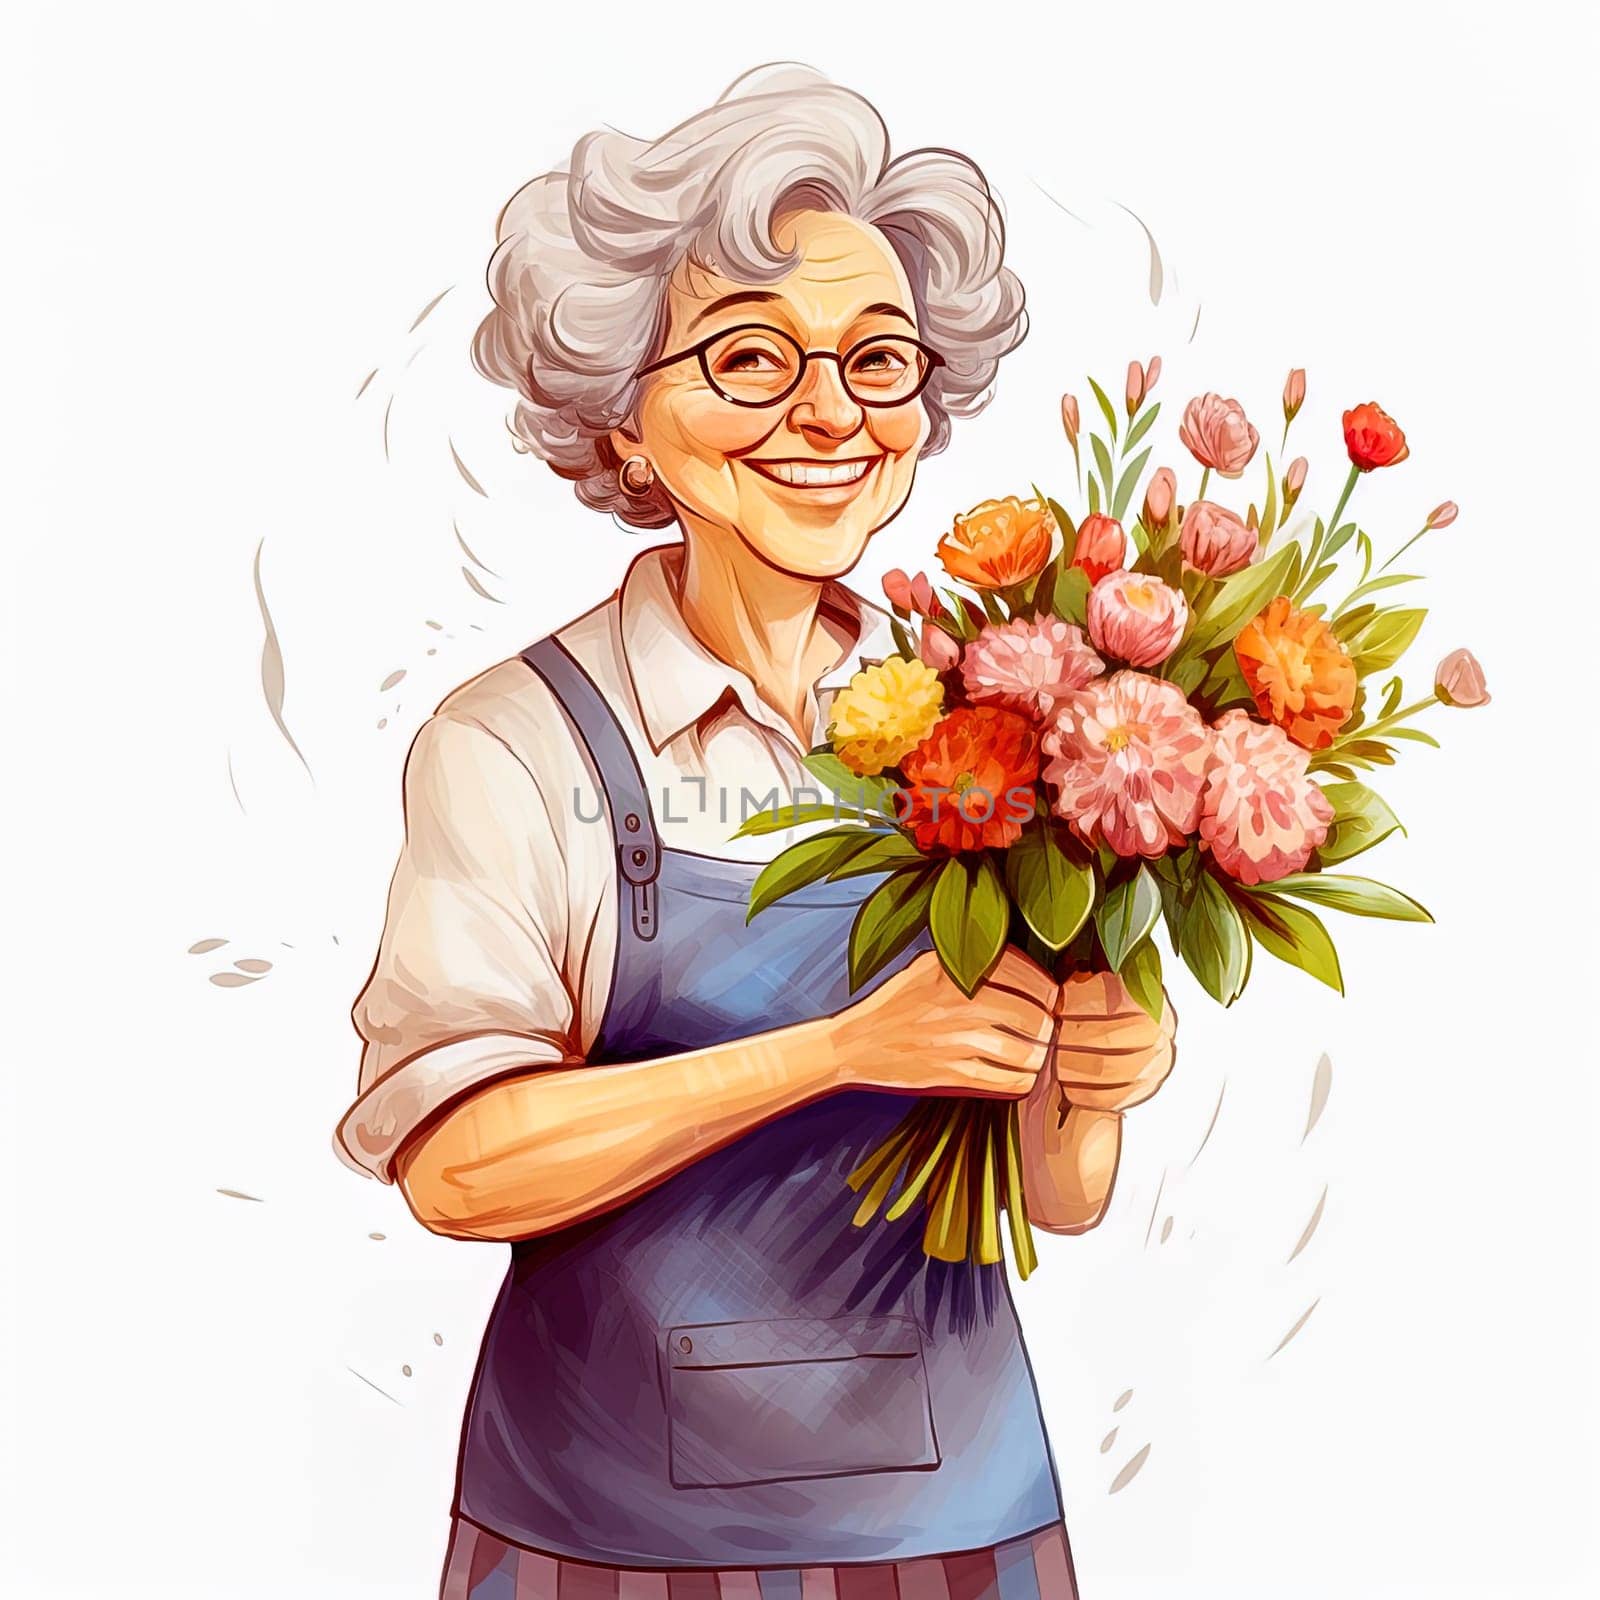 Illustration of an adult female primary school teacher with a bouquet of flowers. by Yurich32